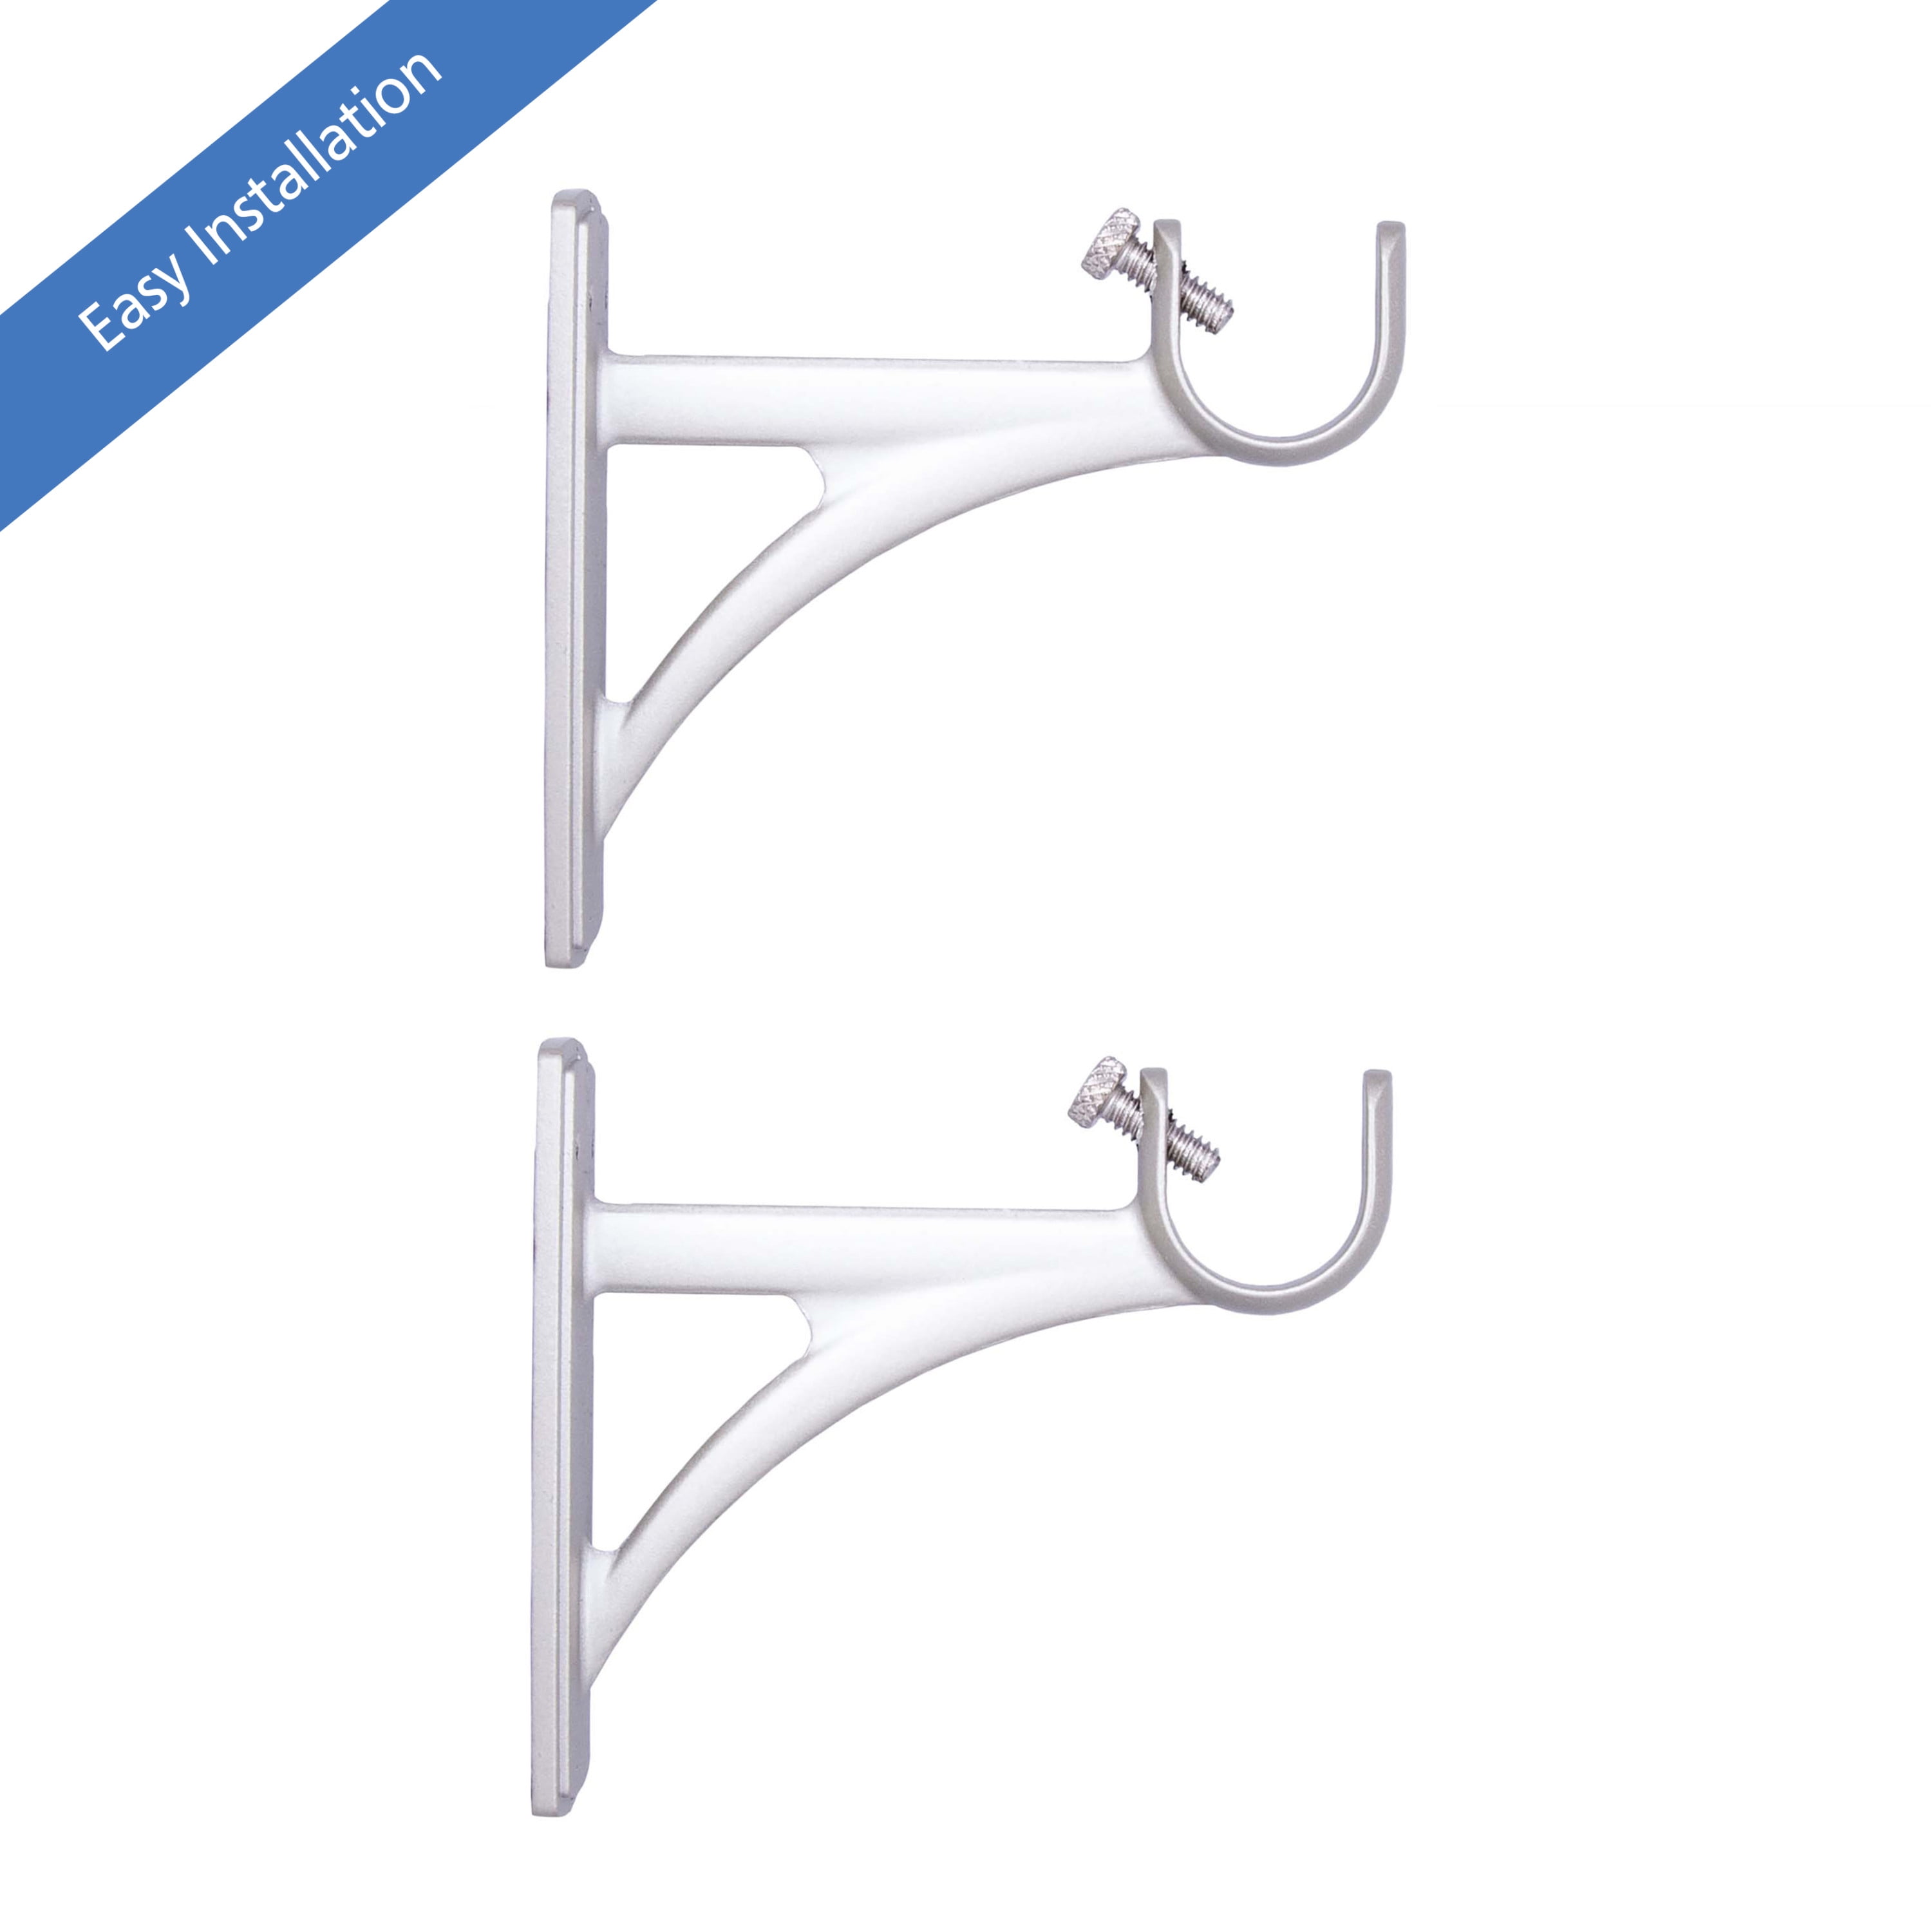 Mainstays Fast Fit Easy Install Single Curtain Rod Brackets, 3/4 in. to 1 in. Diameter